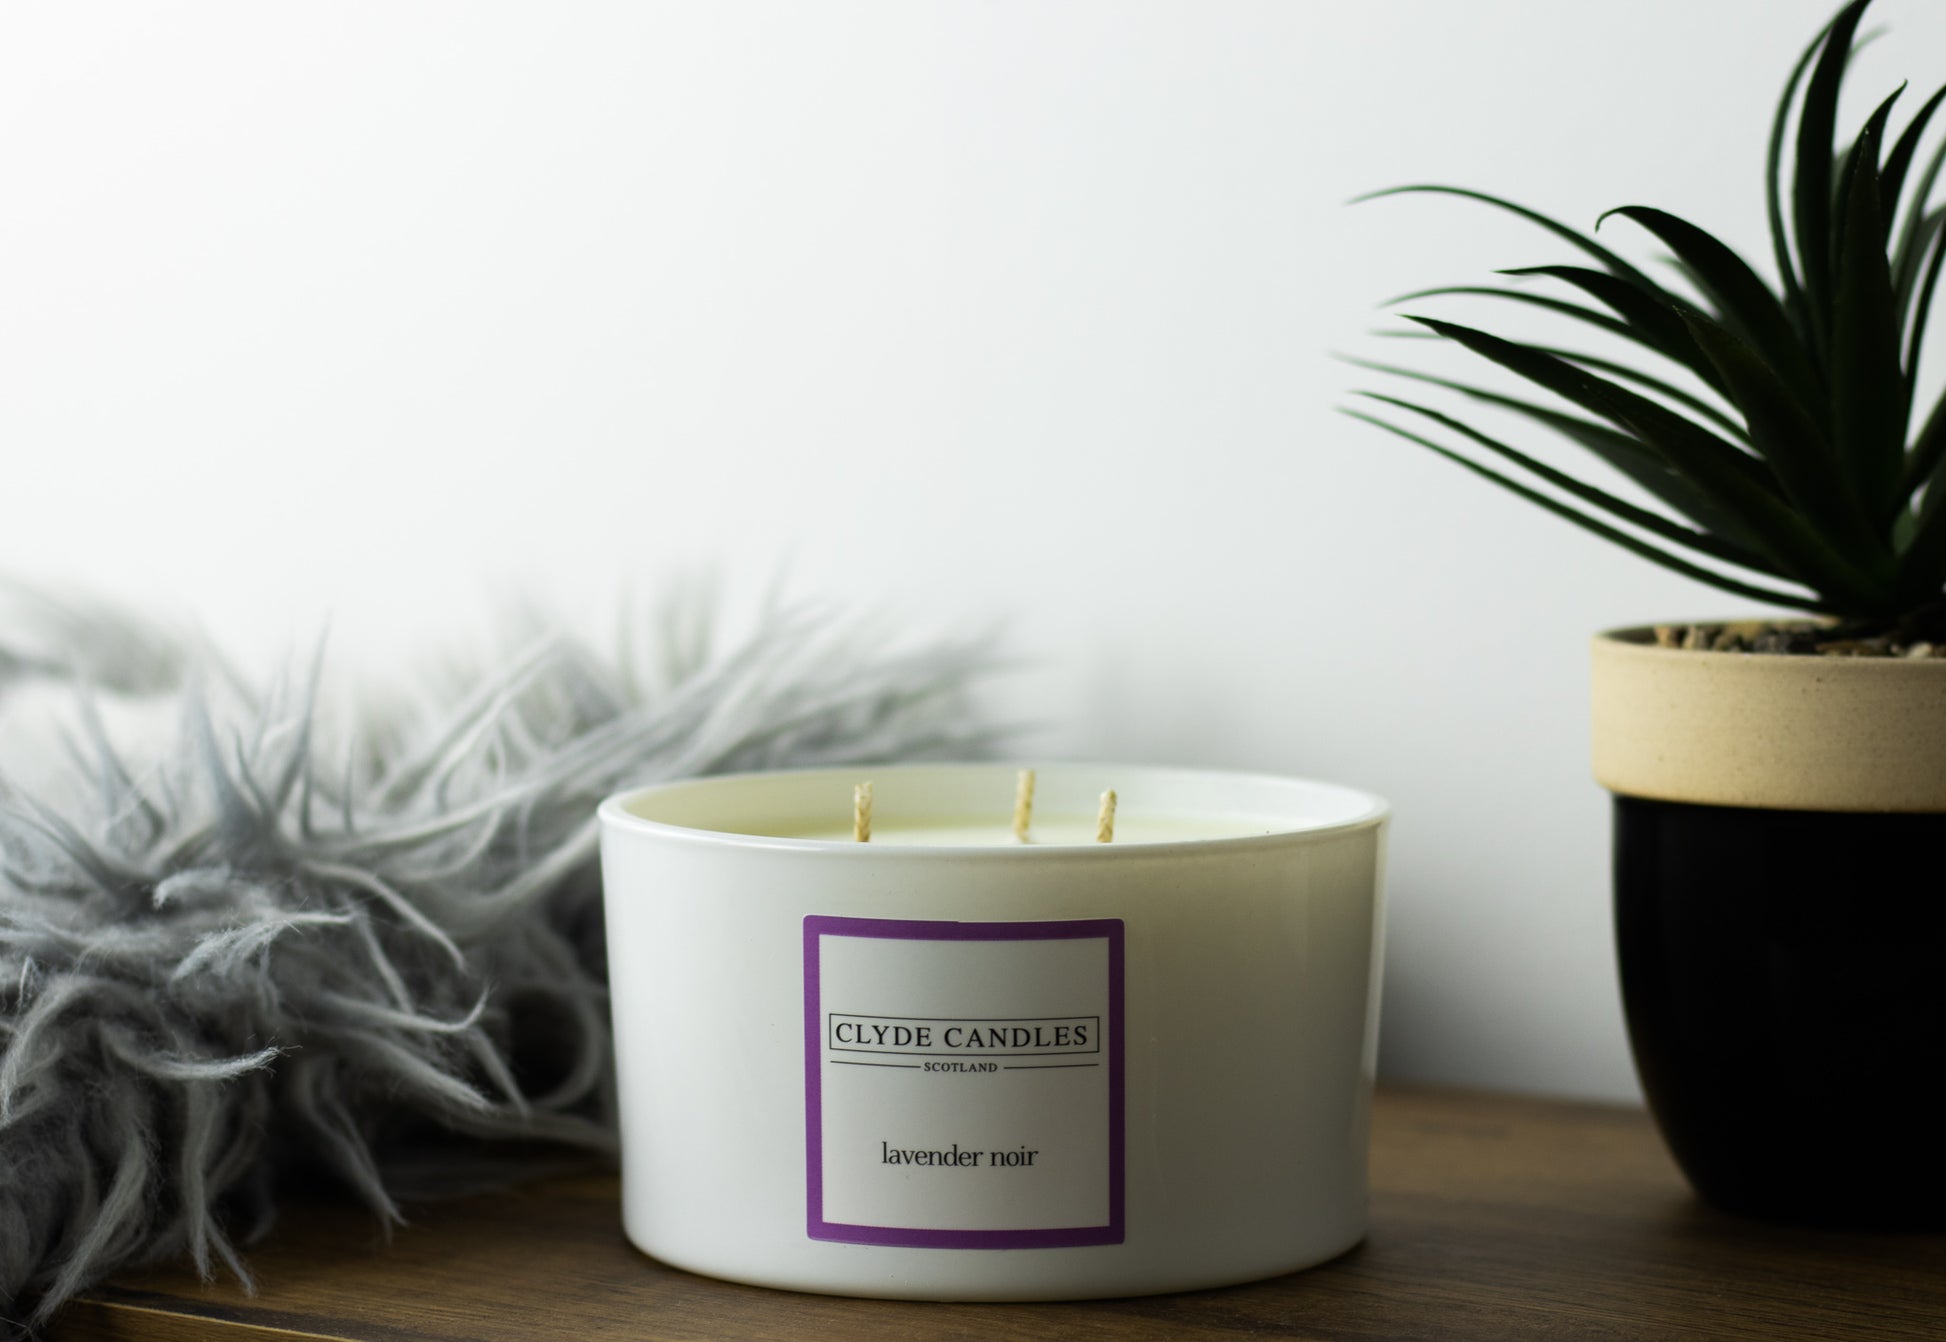 lavender noir Scented Candle Gift Box Three Wicks, Natural Soy wax, Scottish Candles, Clyde Candles, Gifts for mum, Mothers day gifts, Vegan Candle